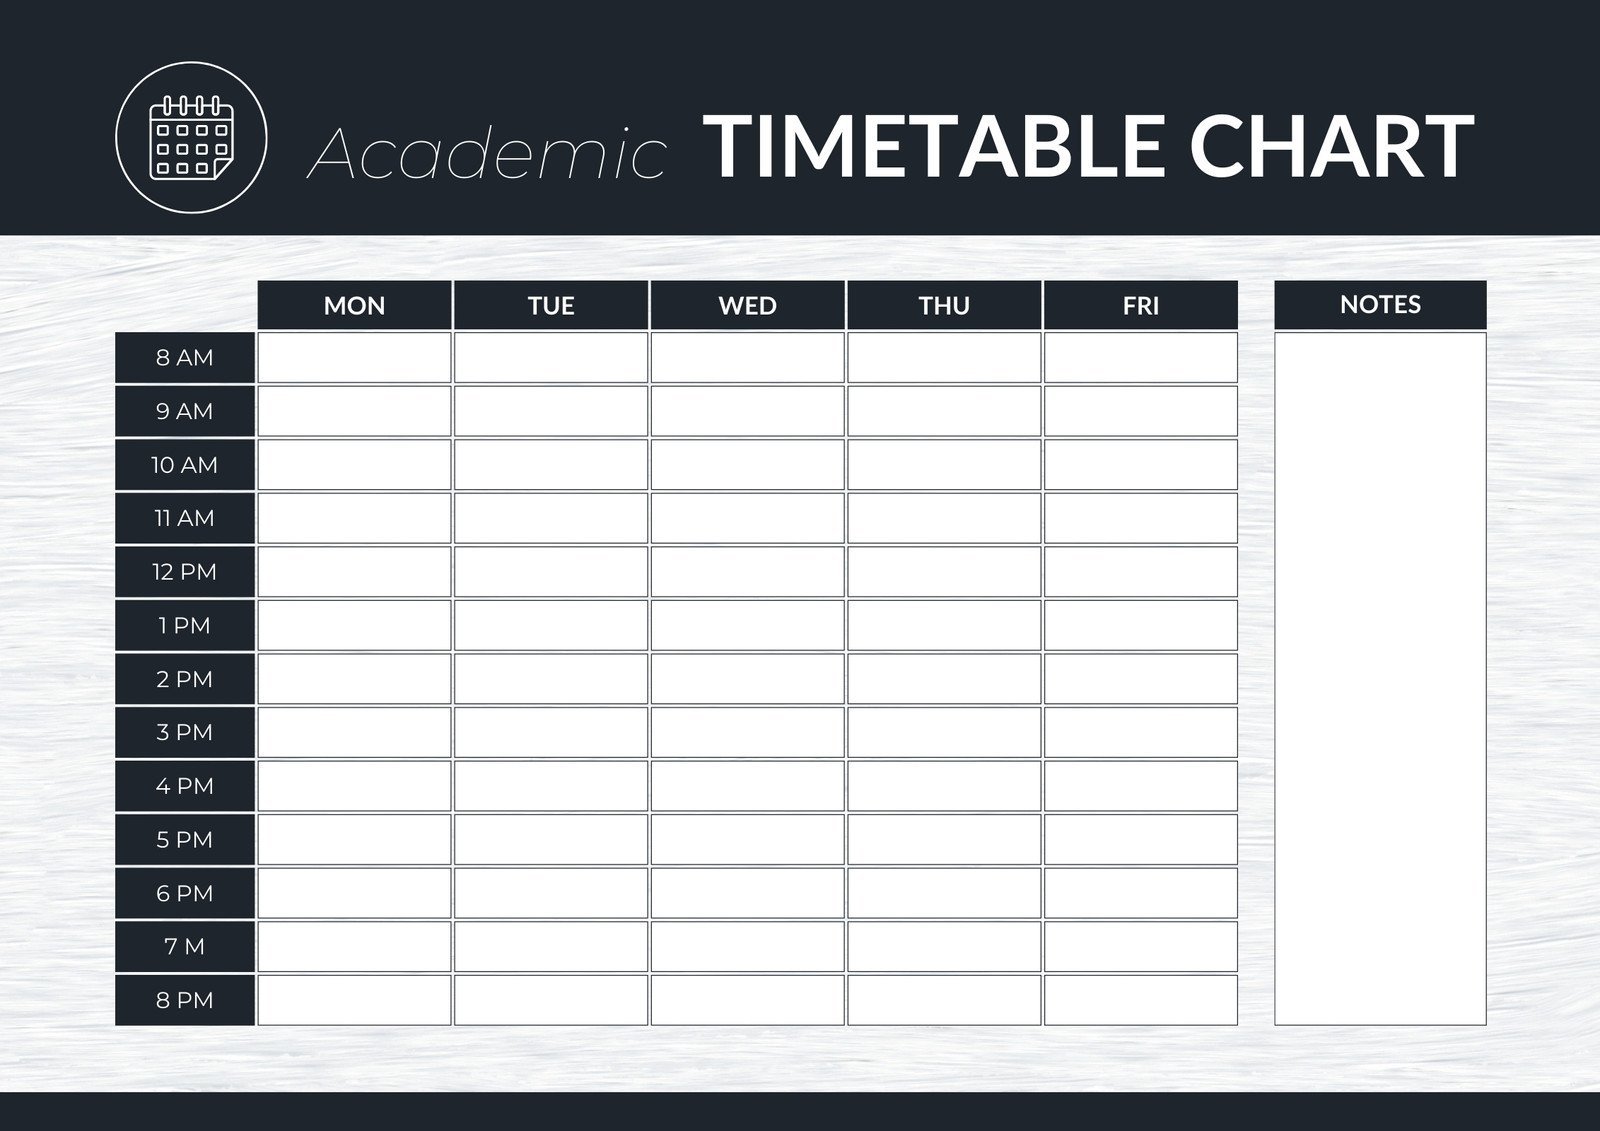 Free printable class schedule templates to customize